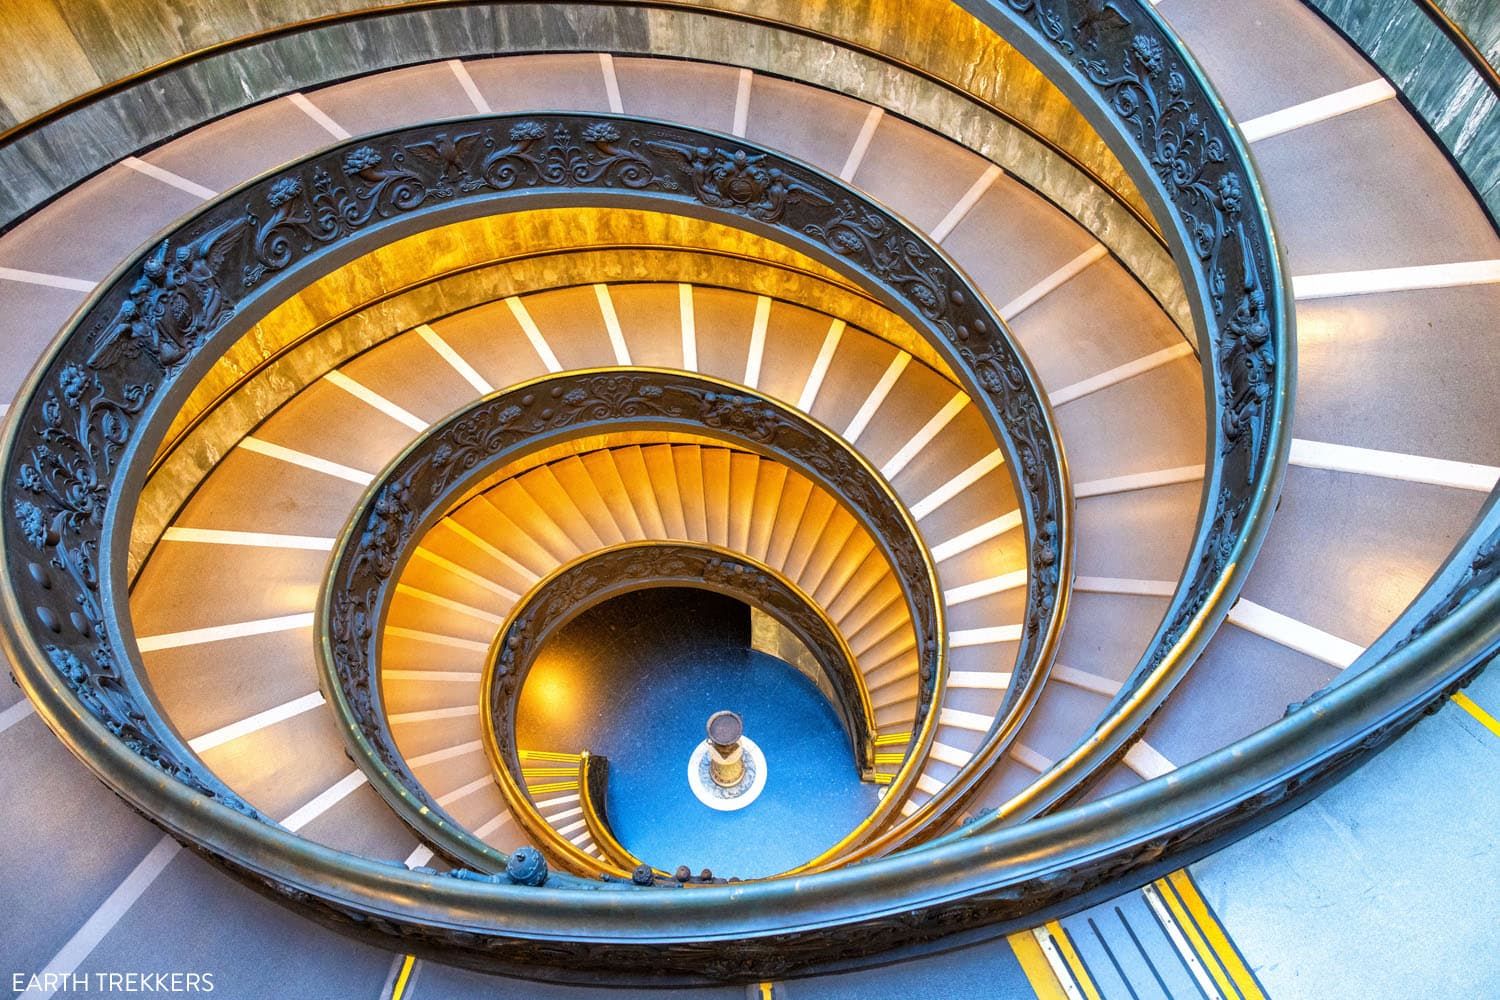 Vatican Staircase | How to visit the Vatican Museums and St. Peter's Basilica